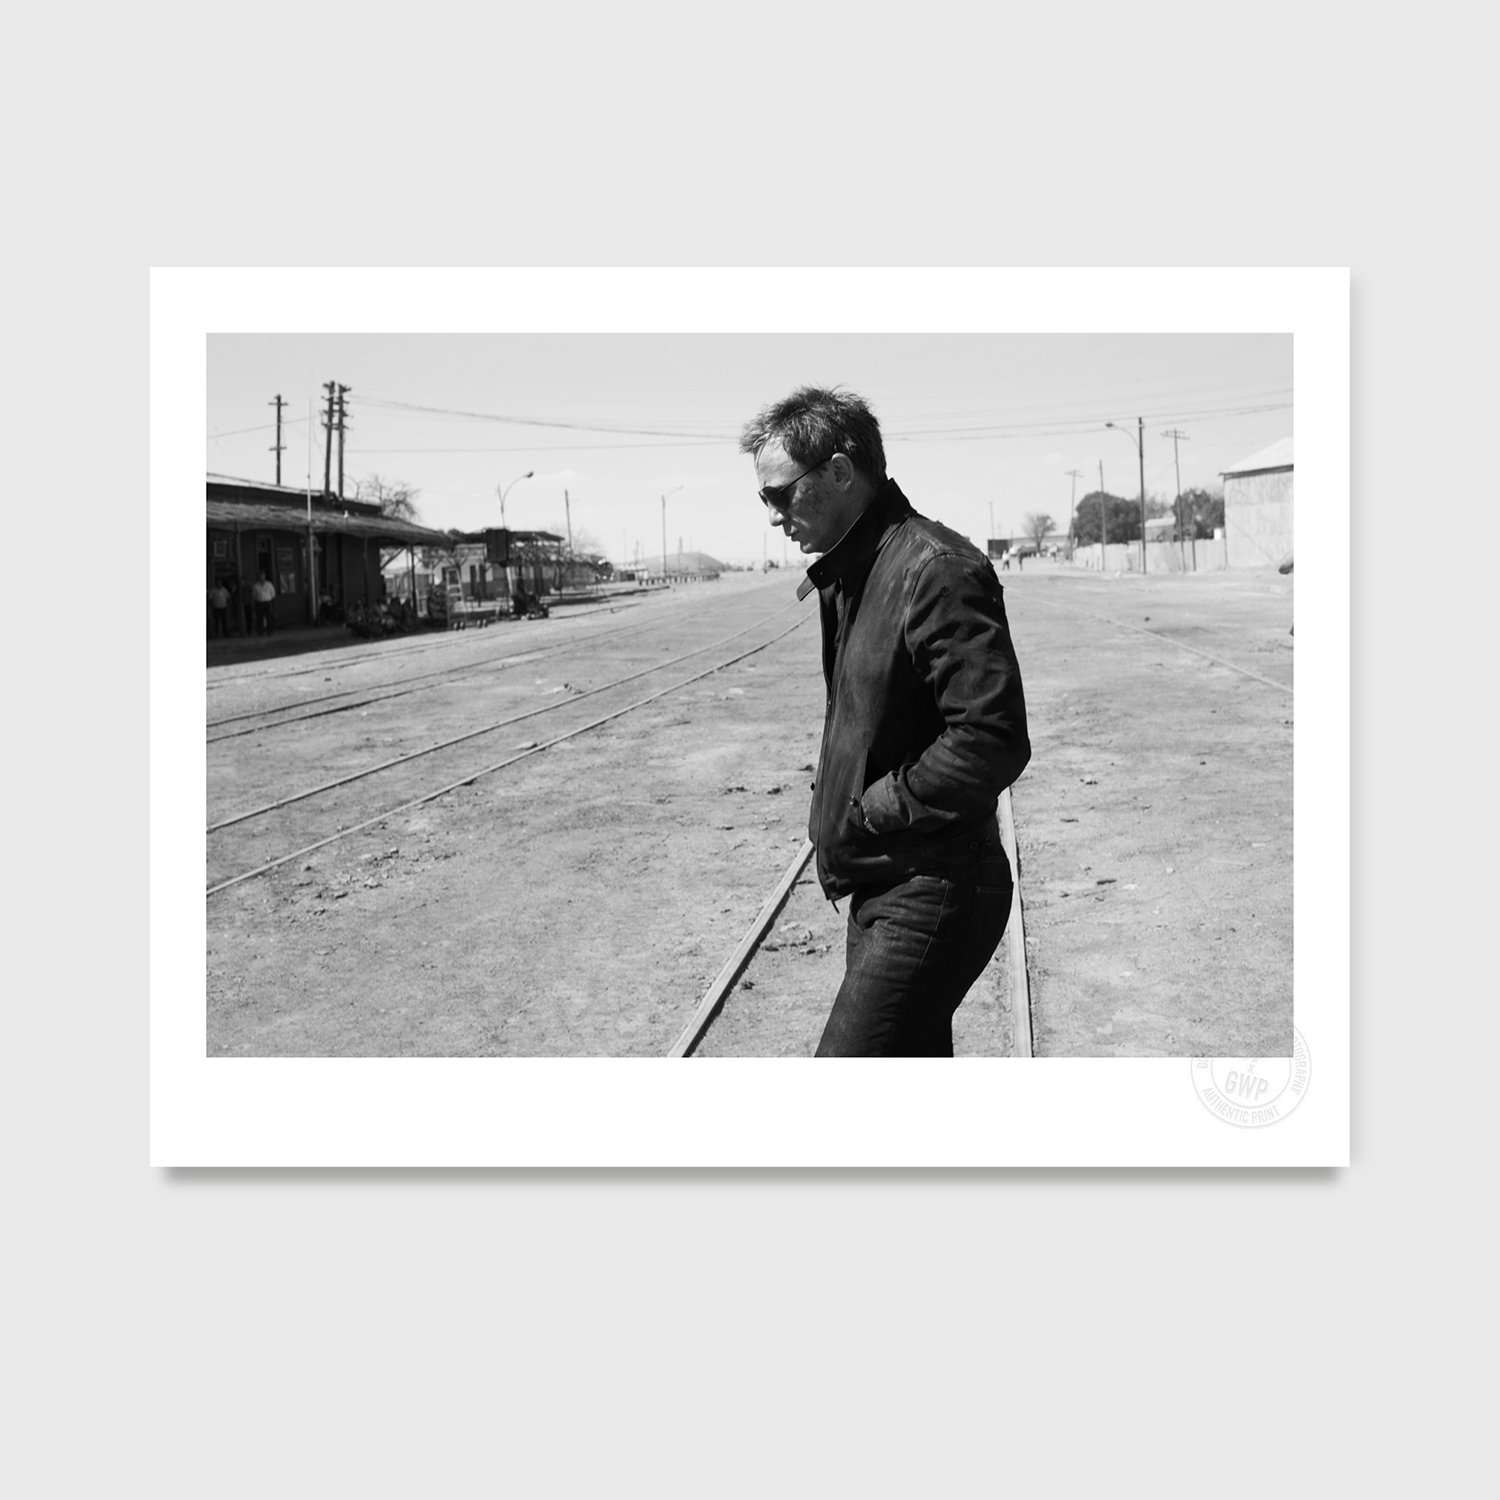 Daniel Craig In Chile (2008) Studio Stamped Print - By Greg Williams Photography PHOTO PRINT Greg Williams 